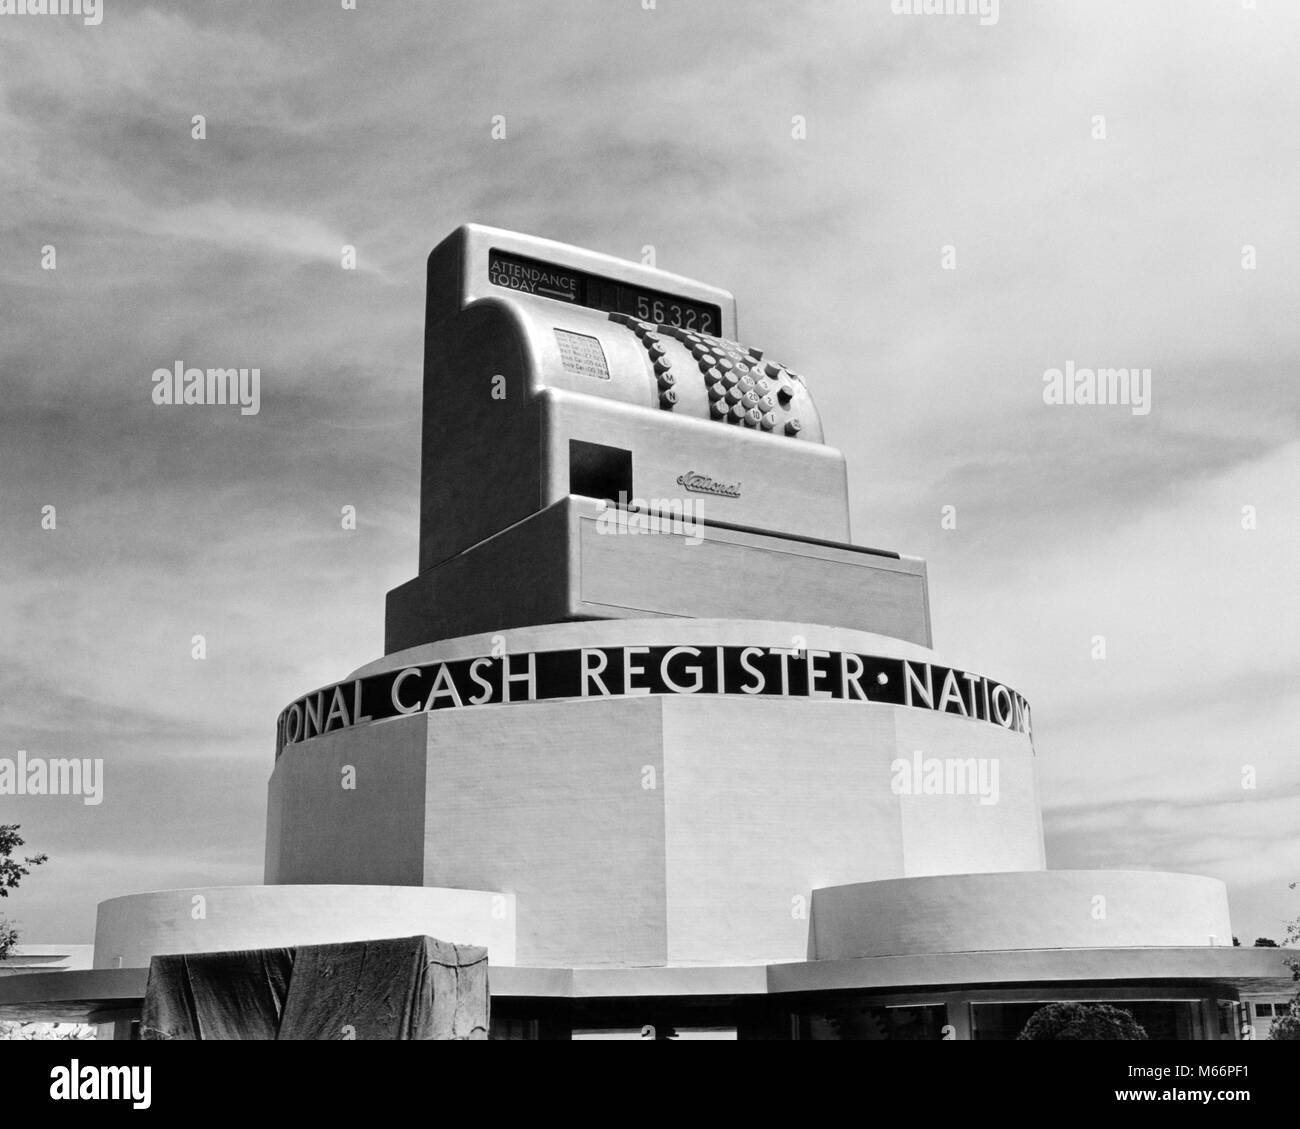 1930s 1939 WORLD'S FAIR NATIONAL CASH REGISTER GIANT CASH REGISTER DISPLAYED DAILY FAIR ATTENDANCE NEW YORK CITY USA - r1393 PAL001 HARS NCR ATTENDANCE B&W BLACK AND WHITE CORONA PARK DAILY DISPLAYED DISPLAYING DISPLAYS EXPO EXPOSITION FLUSHING MEADOW GIANT OLD FASHIONED Stock Photo